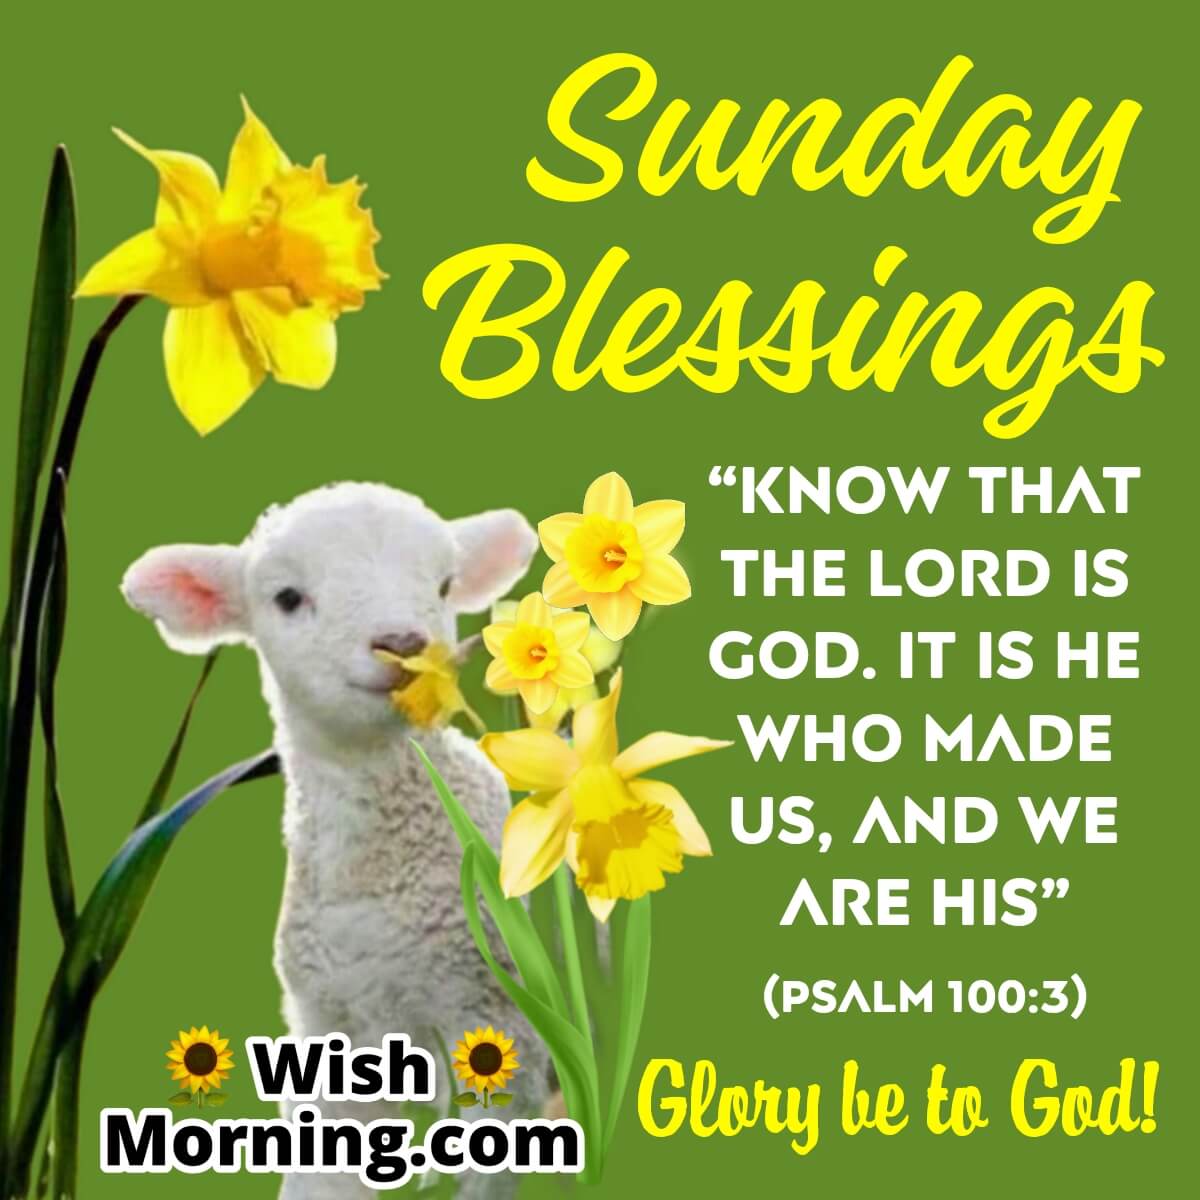 Sunday Blessings Images Wish Morning